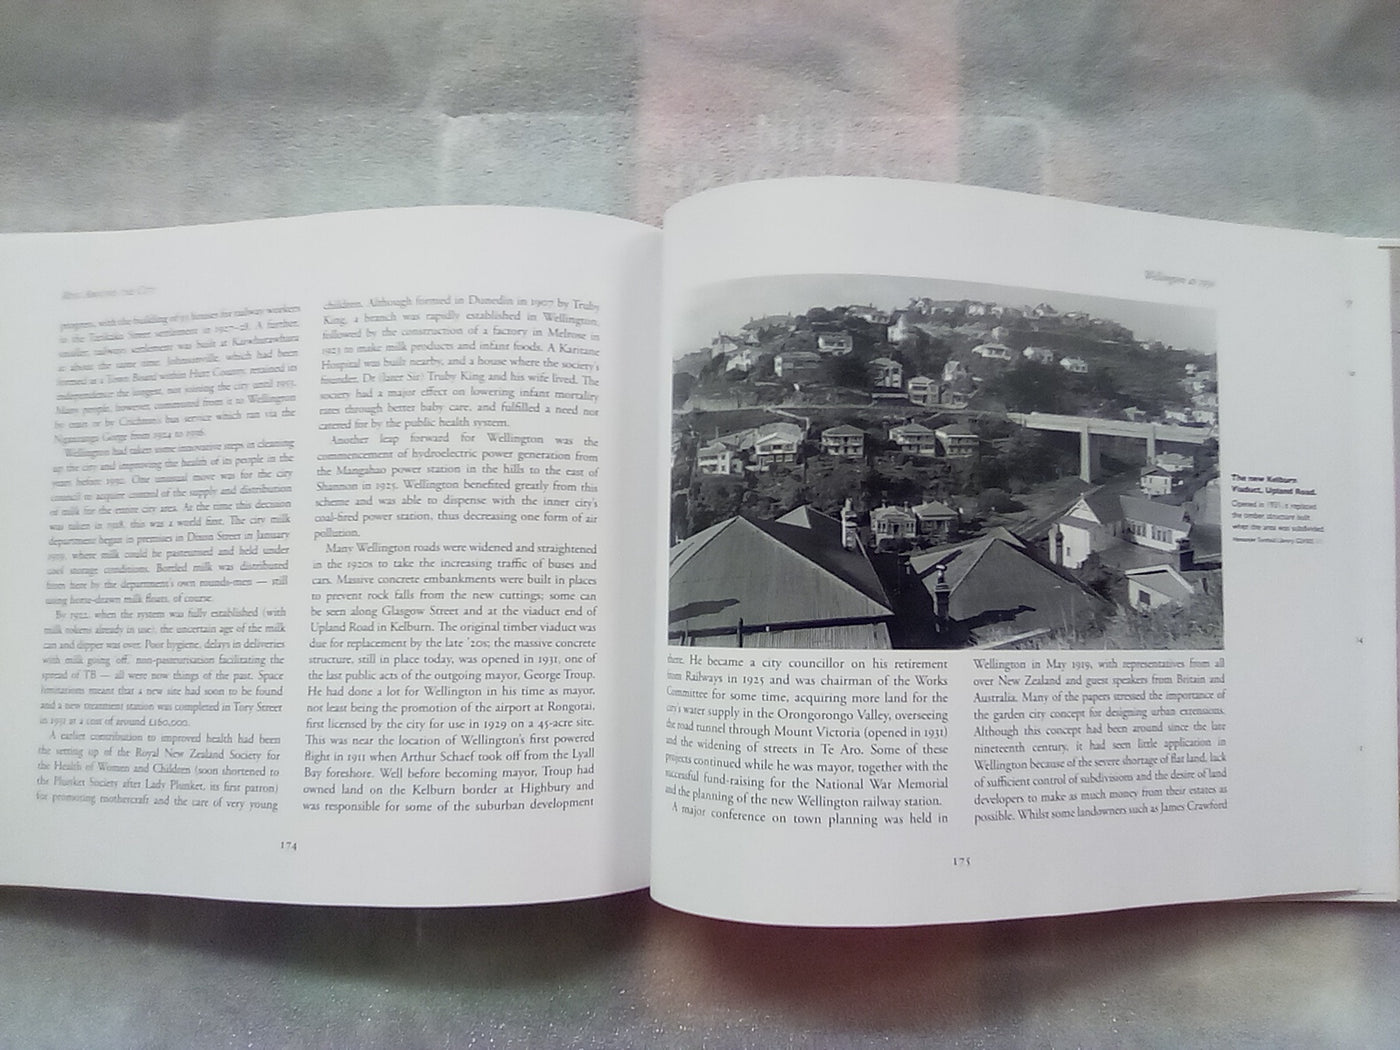 Ring Around the City - Wellington's New Suburbs 1900-1930 (Signed?)